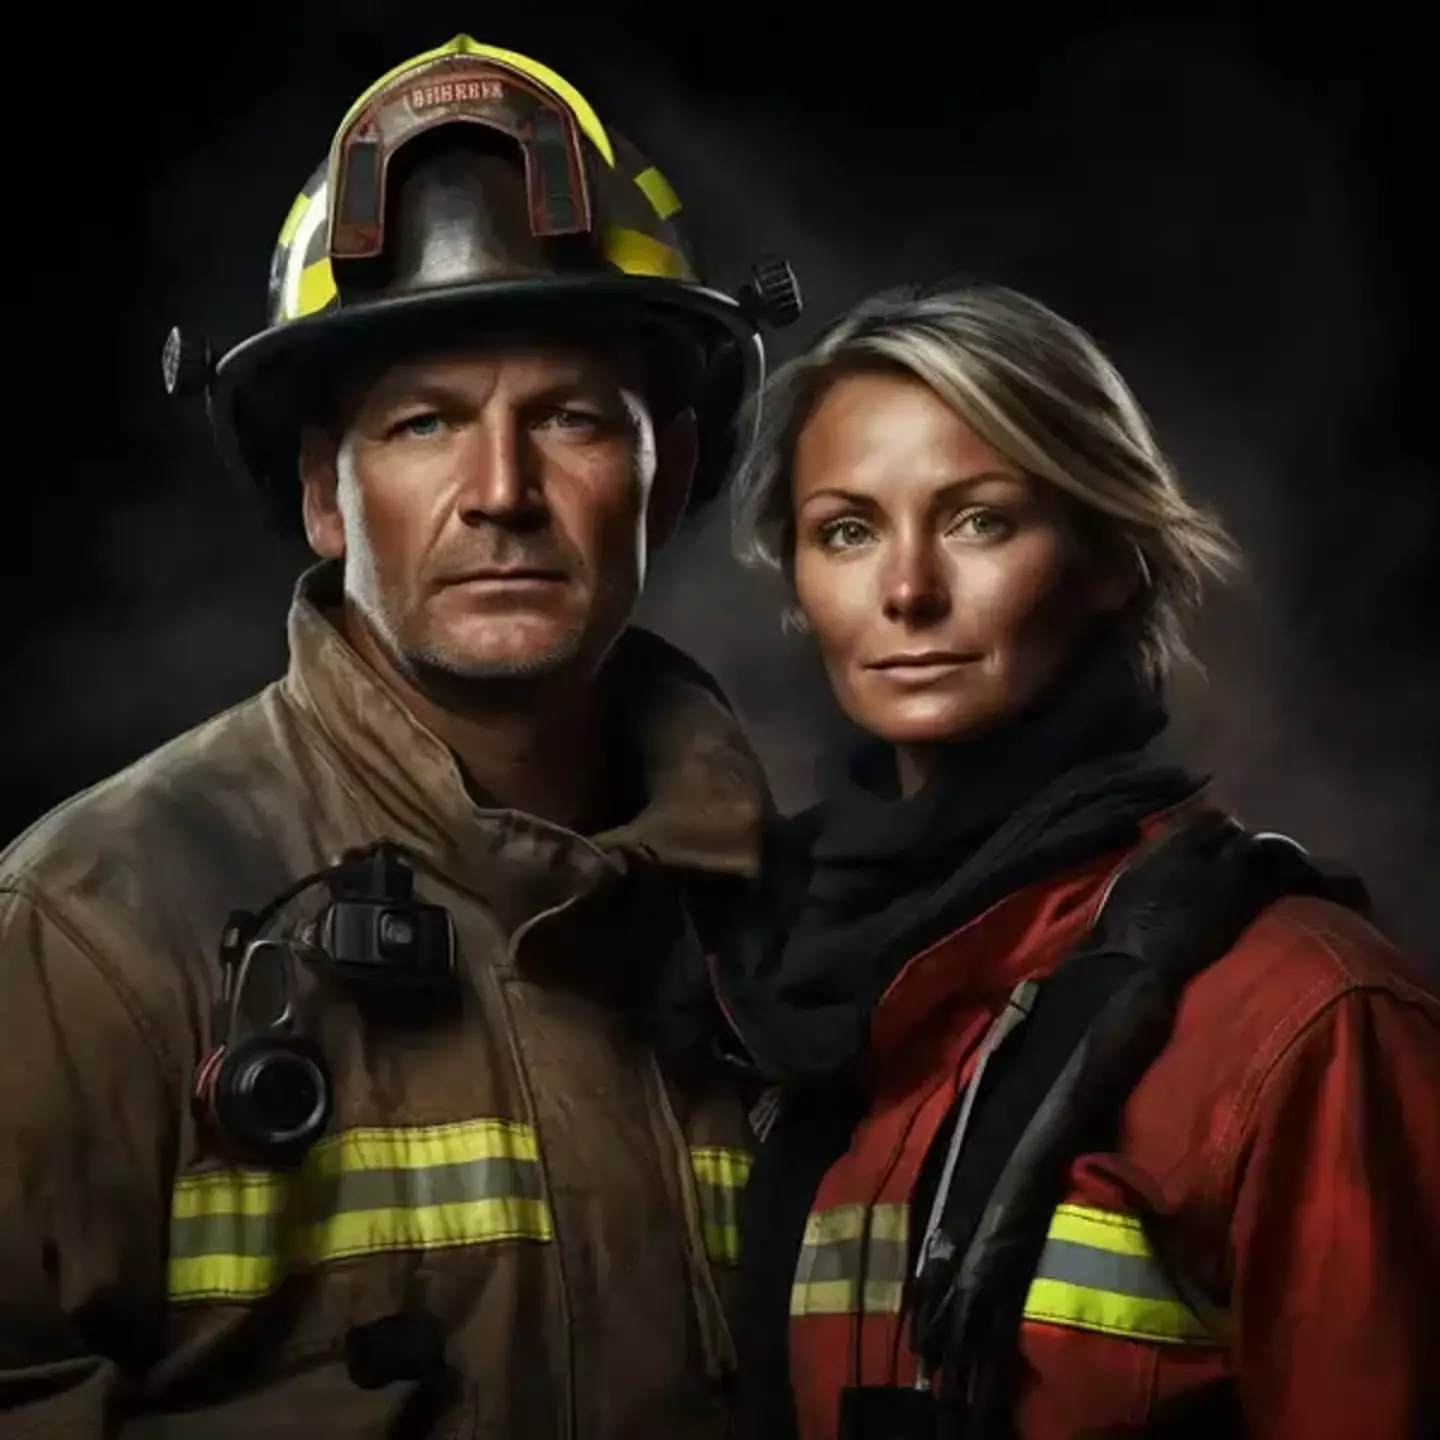 This looks like an advert for a very serious series of Station 19.